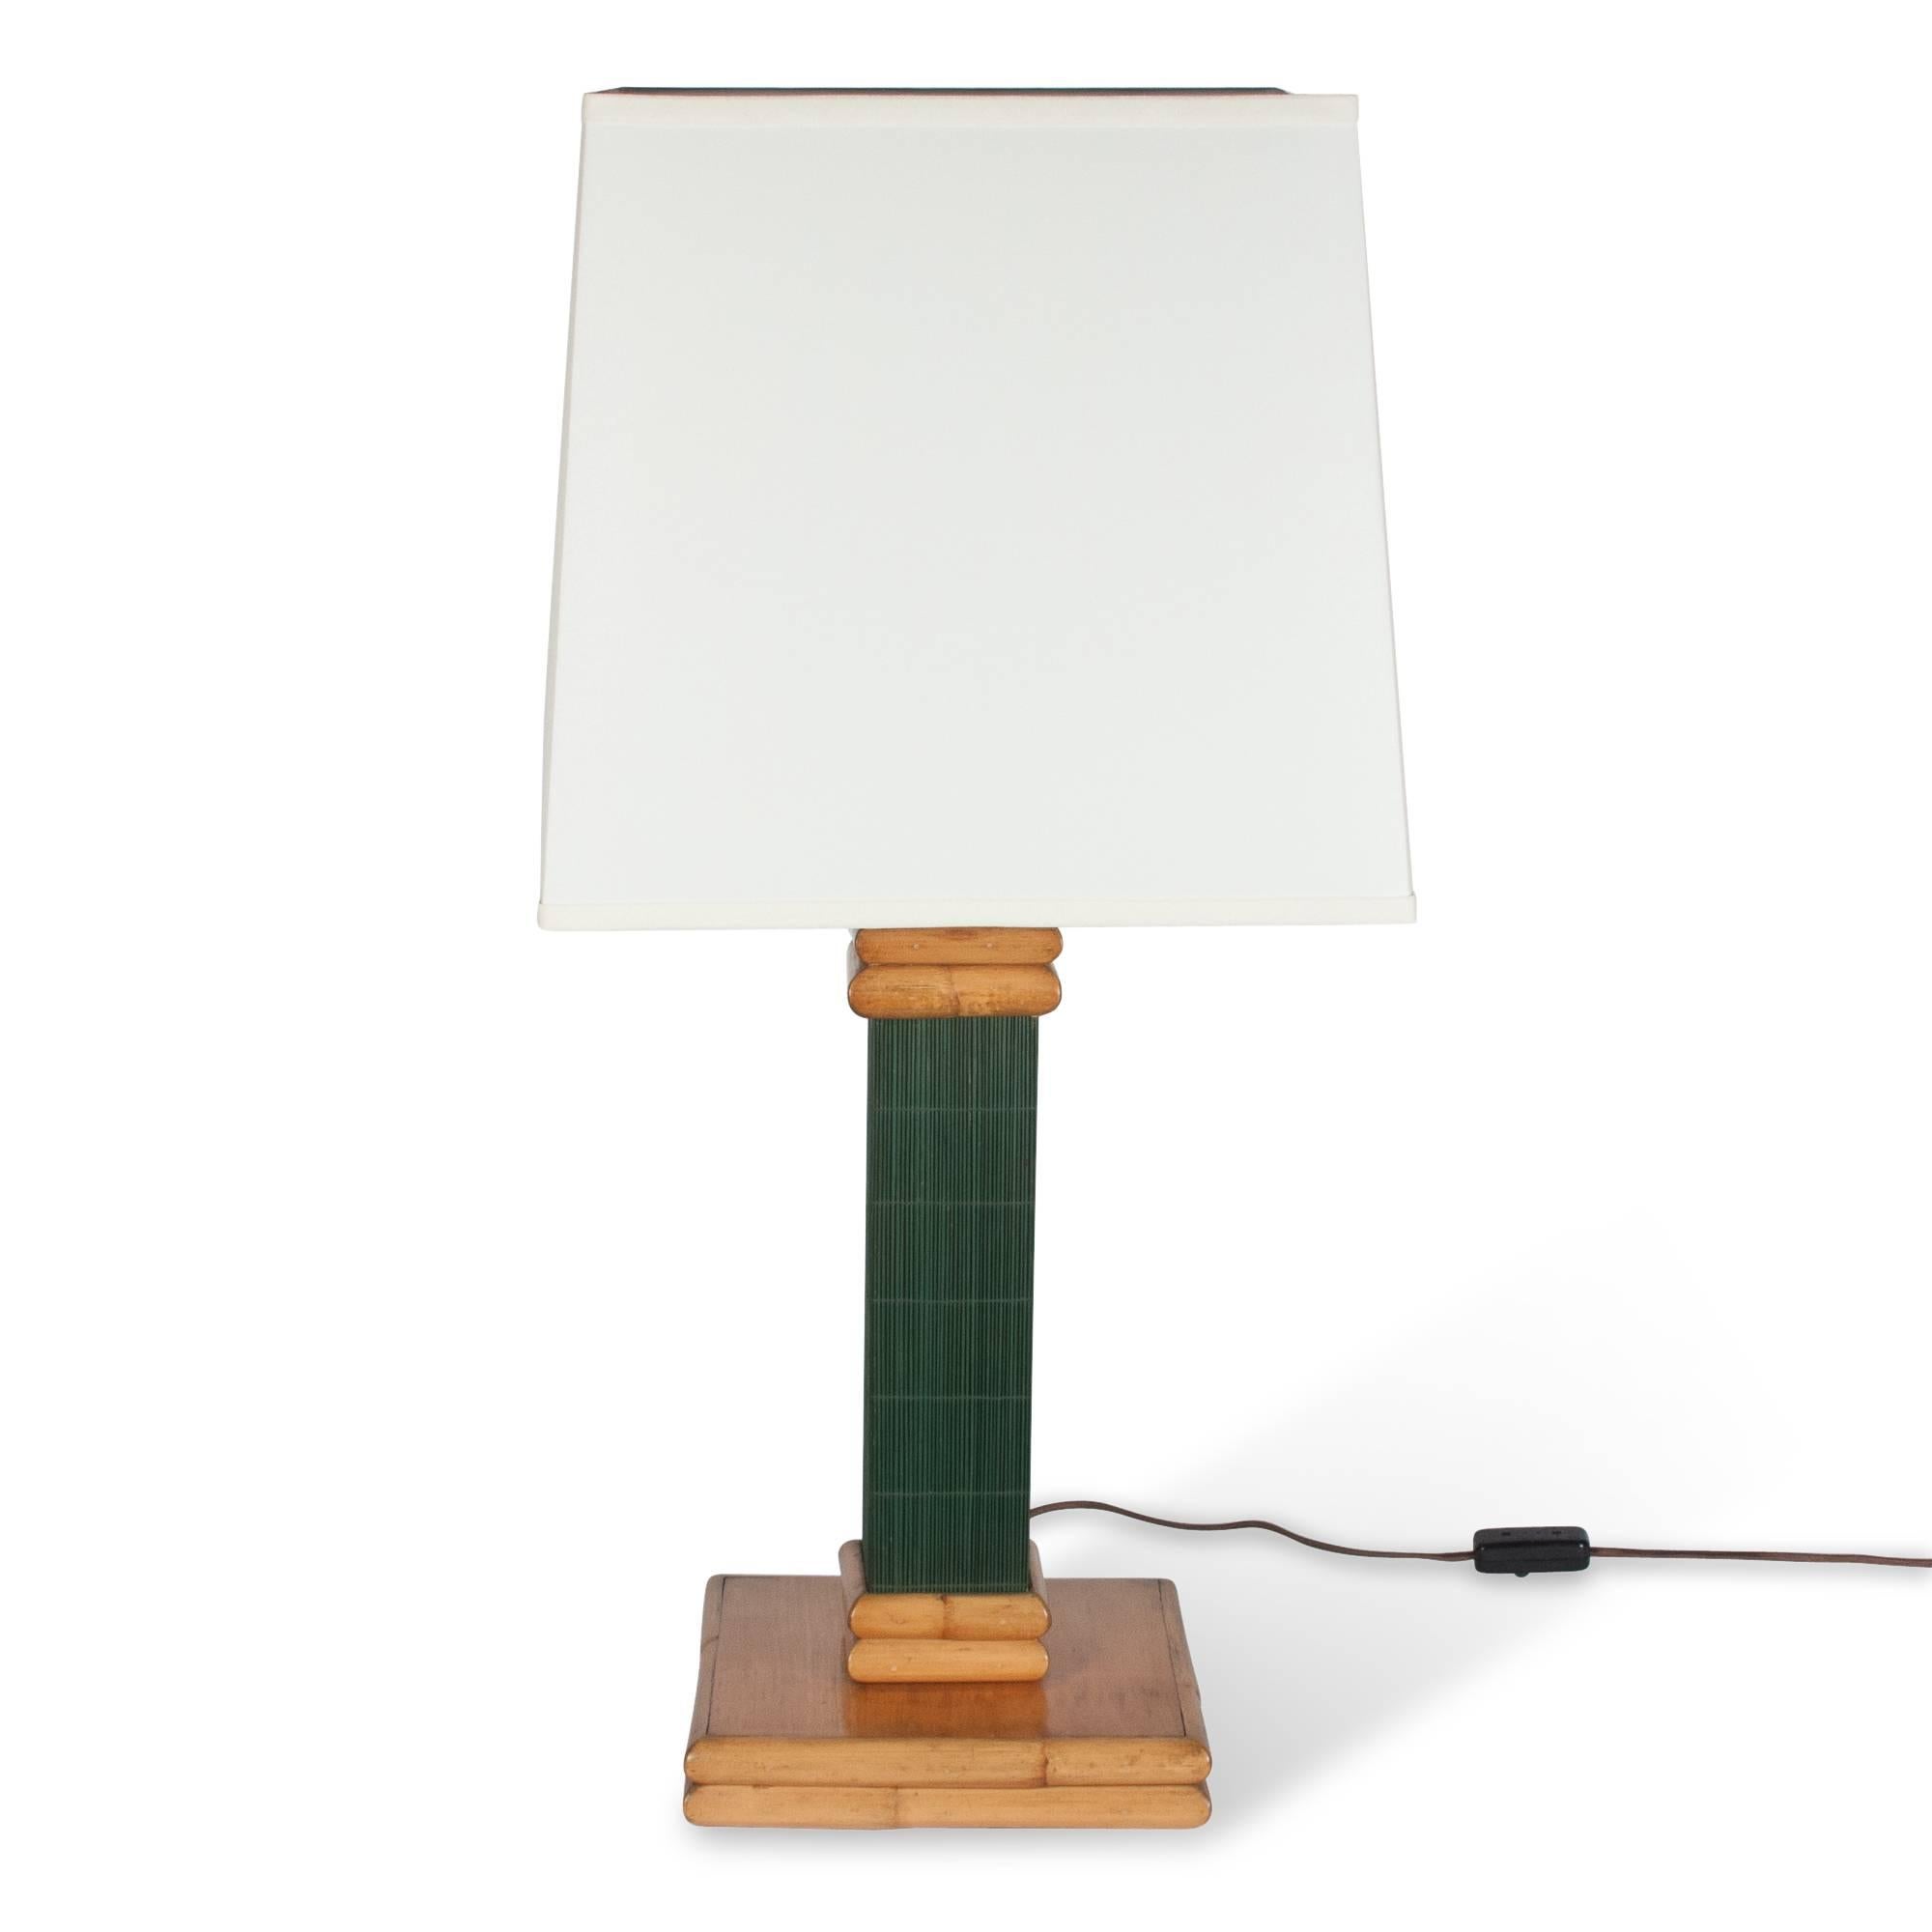 Pair of bamboo and dyed bamboo table lamps, the green dyed central column resting on a natural color square bamboo base, United States 1950s. In custom linen shades. Measures: Overall height 32 in, base measures 9 3/4 in square, column is 4 in